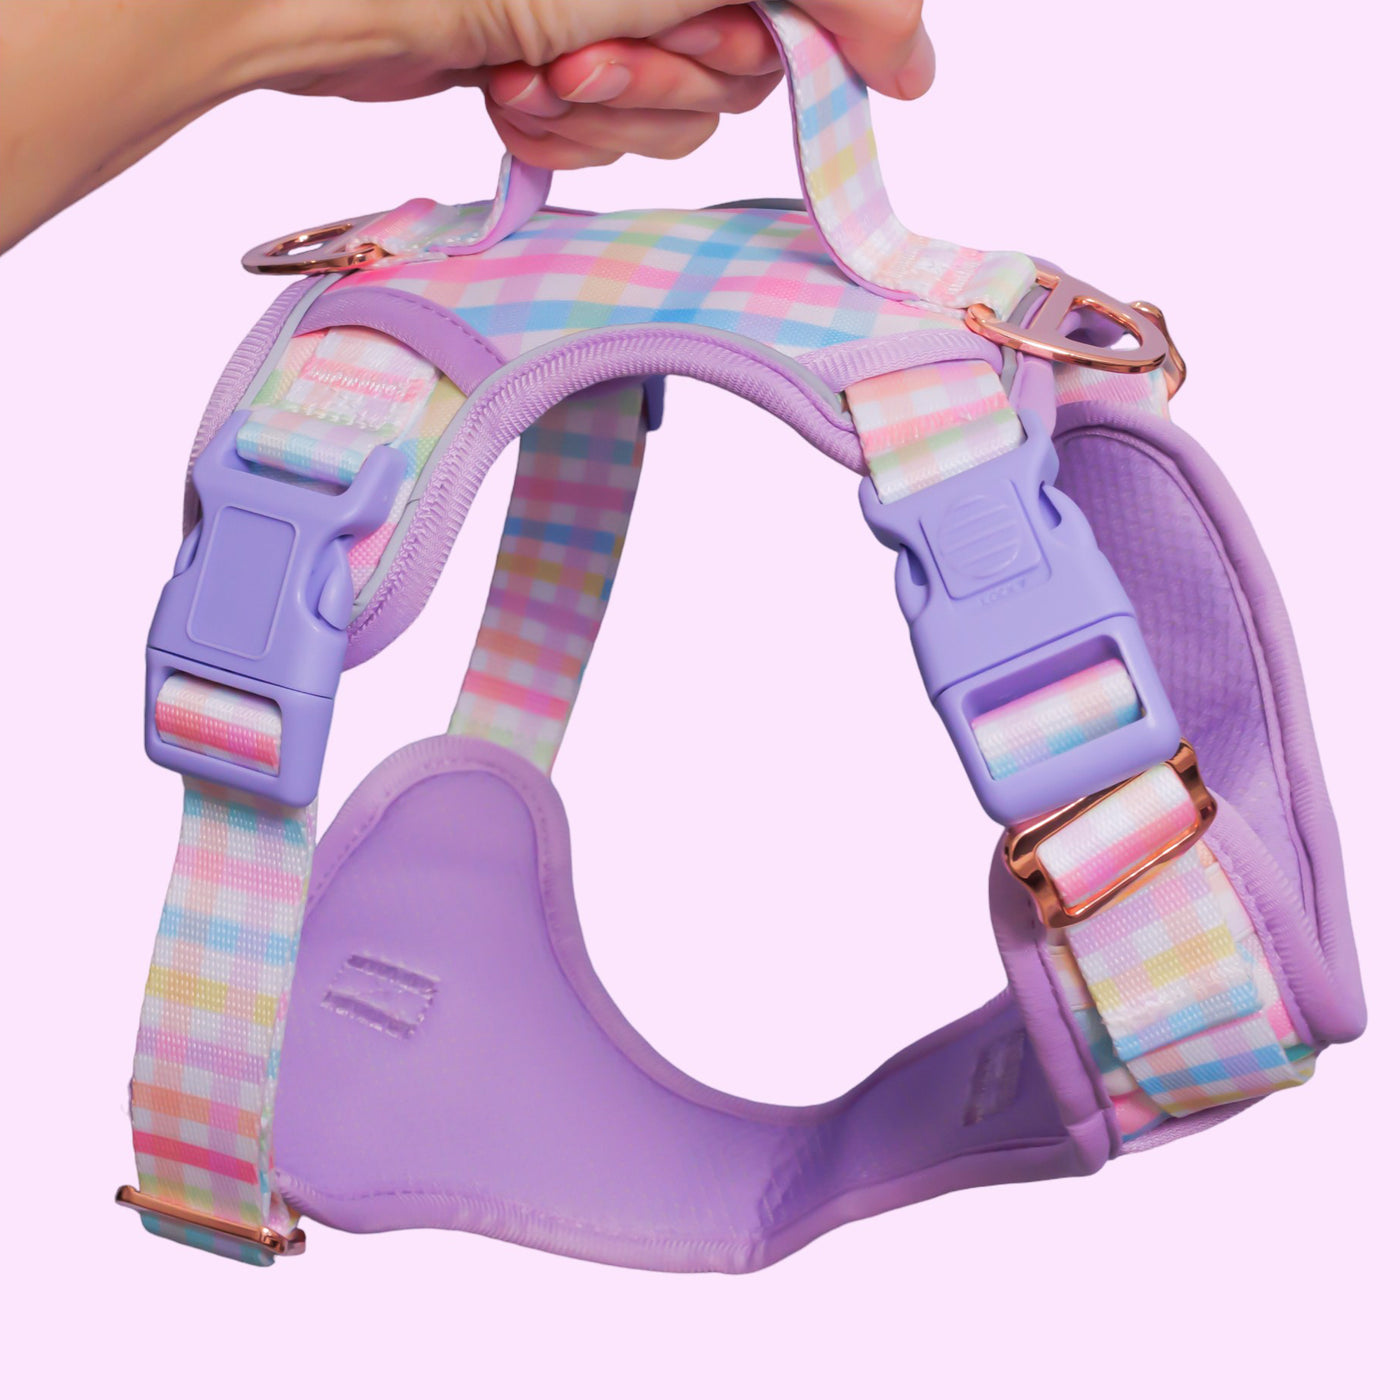 This image displays a hands-on view of a dog harness held against a pink background. The harness features a pastel-colored sherbet gingham pattern with adjustable straps and multiple pastel pink and purple buckles for a secure fit. The fabric of the harness is complemented by rose gold metal accents, including rings and adjustment slides. Additionally, the harness is designed with a purple padded chest plate to ensure comfort for the dog. The overall look is playful and stylish, ideal for a fashionable pet.